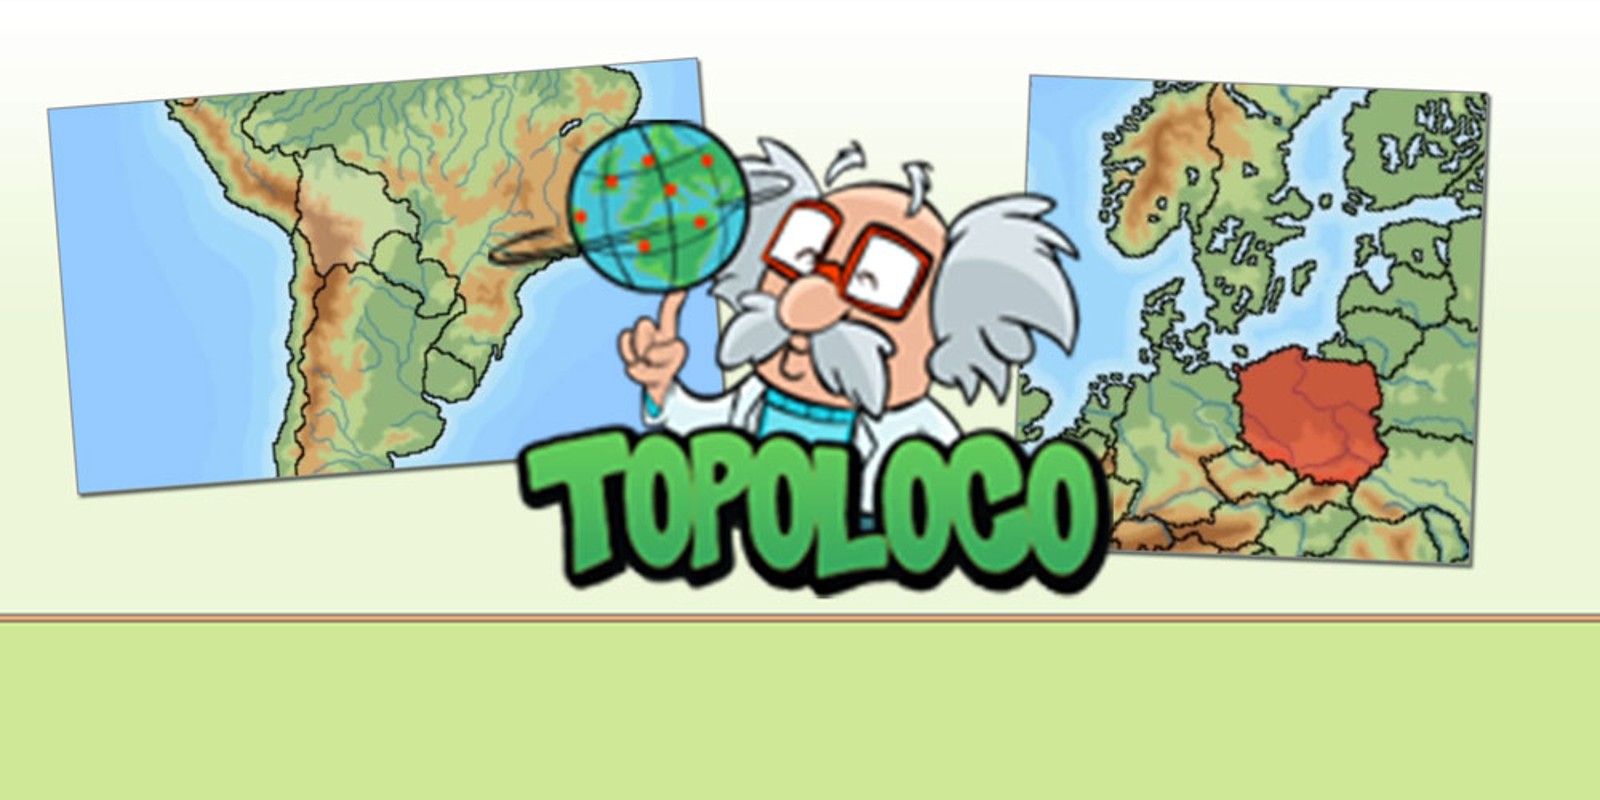 Topoloco - crazy about topography